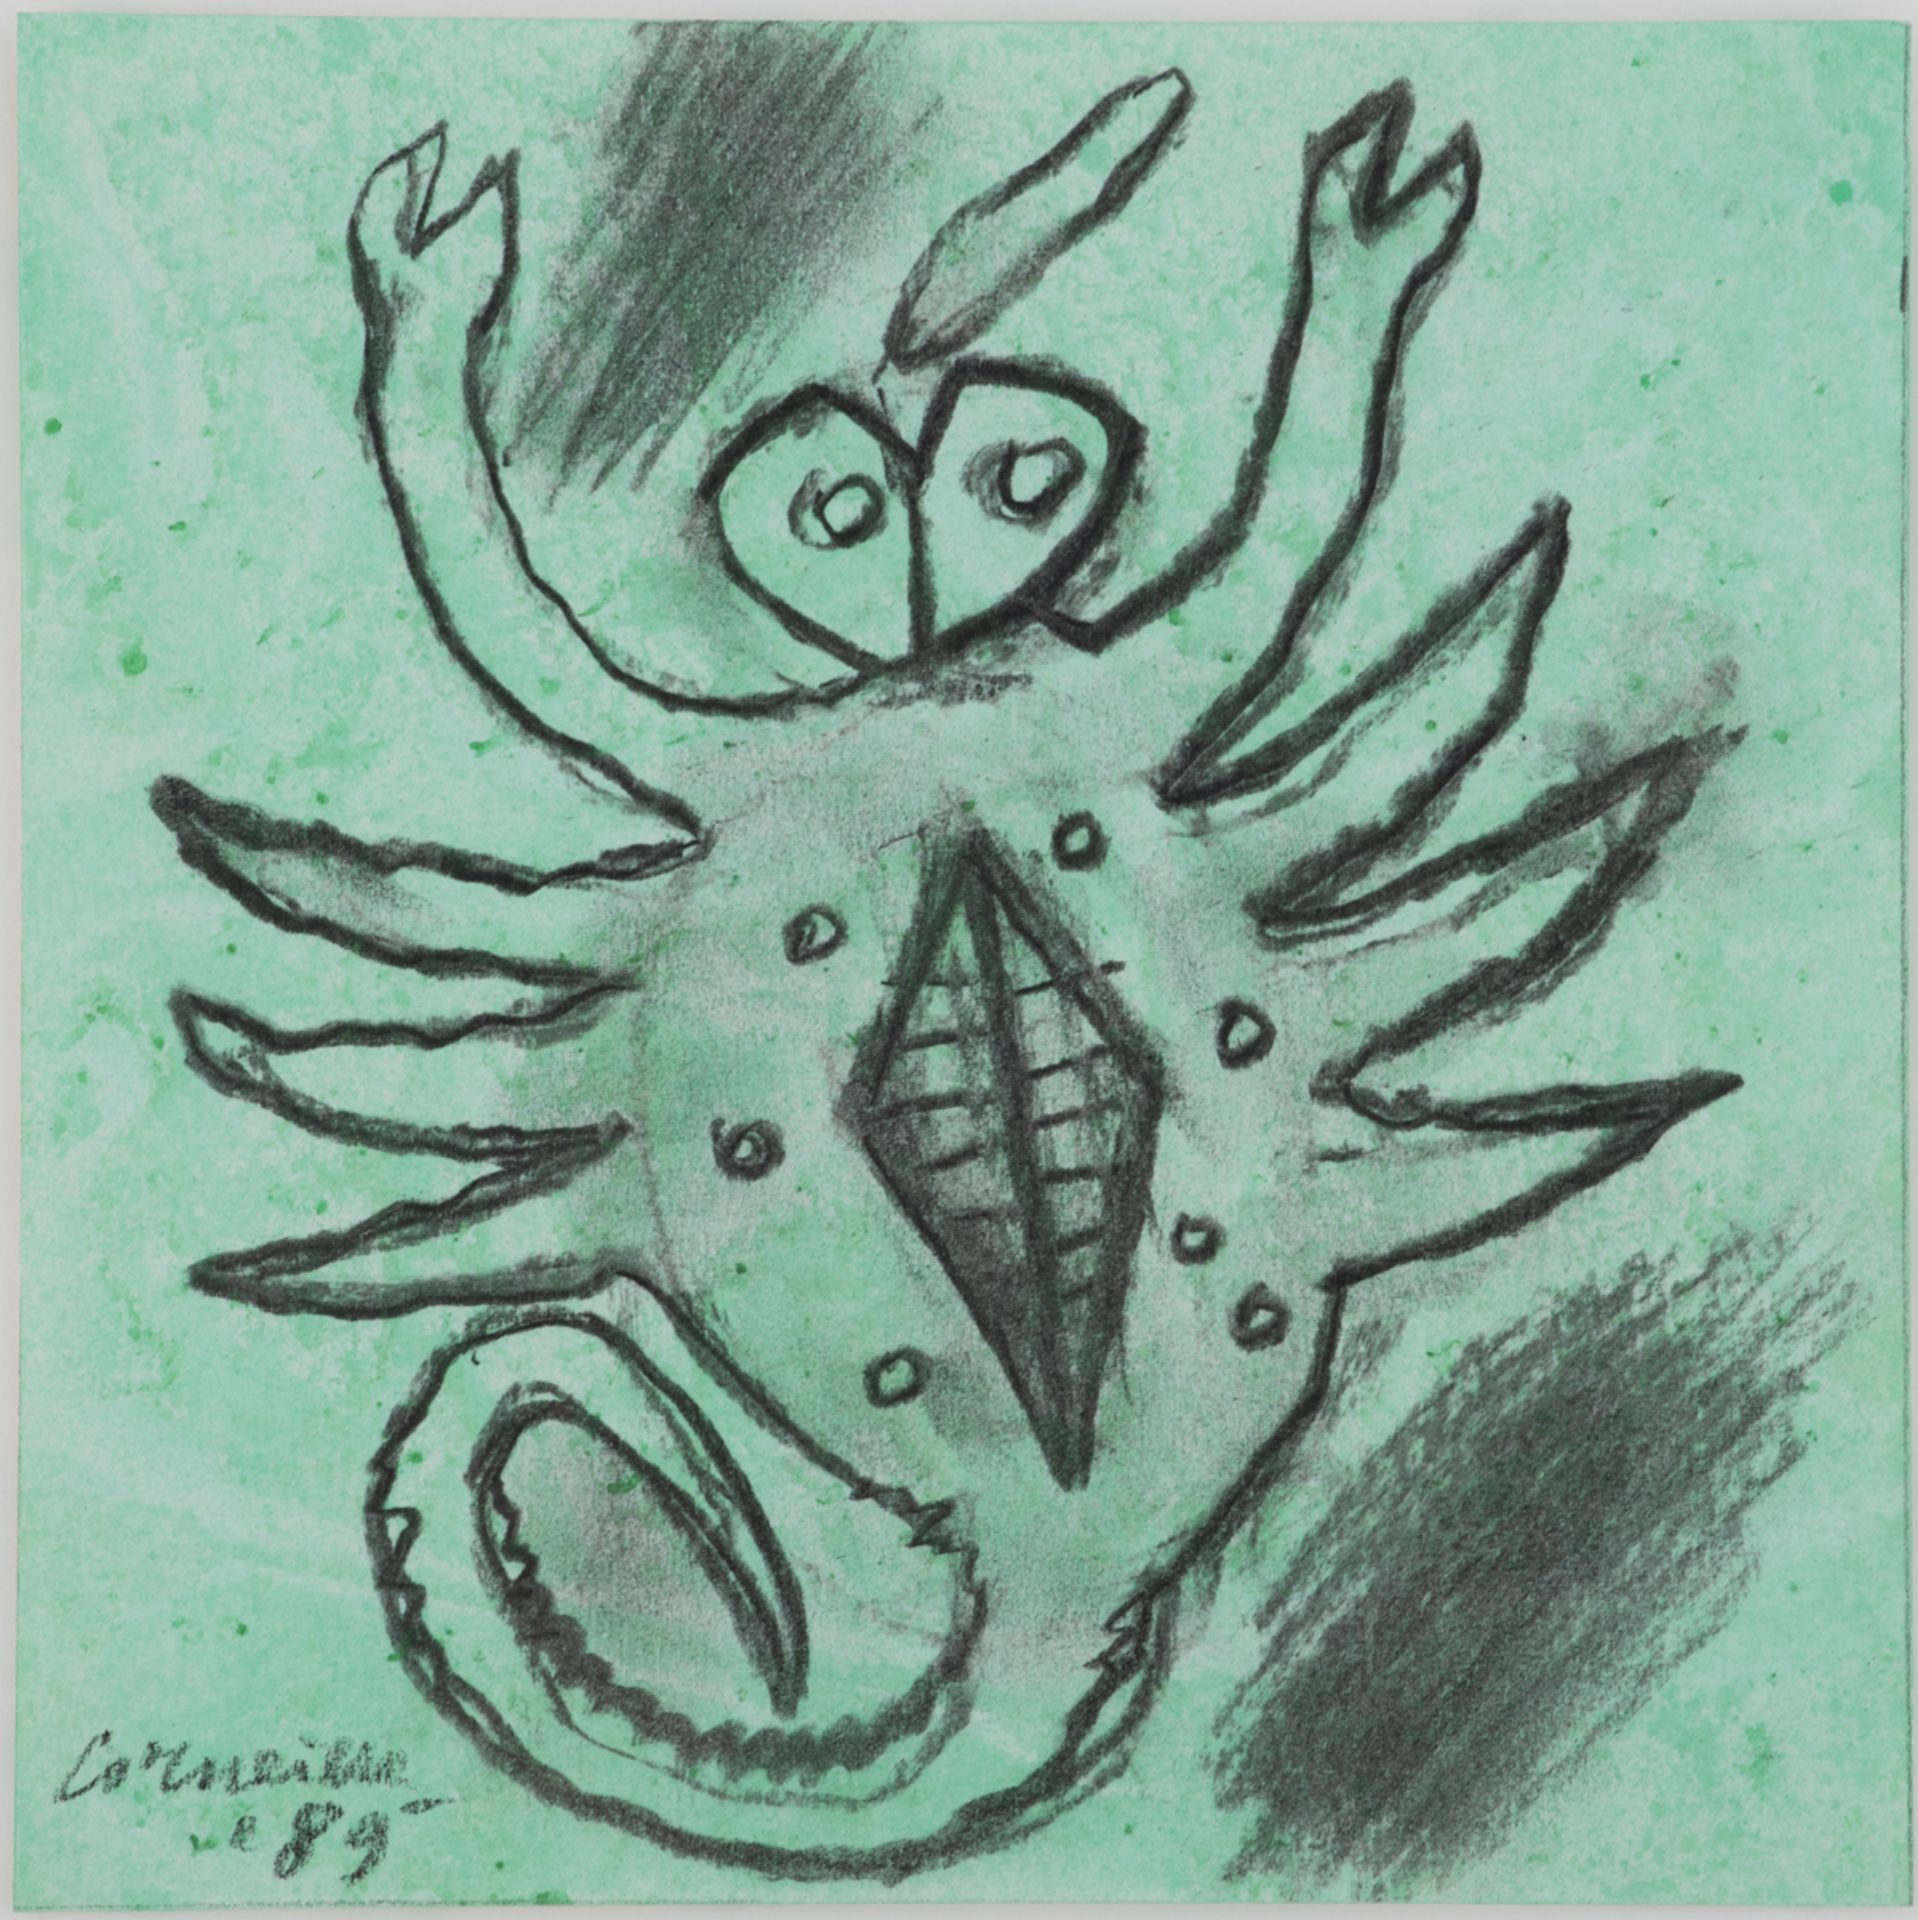 Corneille, an astrological symbol of a Scorpio, dated (19)89, watercolour and charcoal on paper, 19